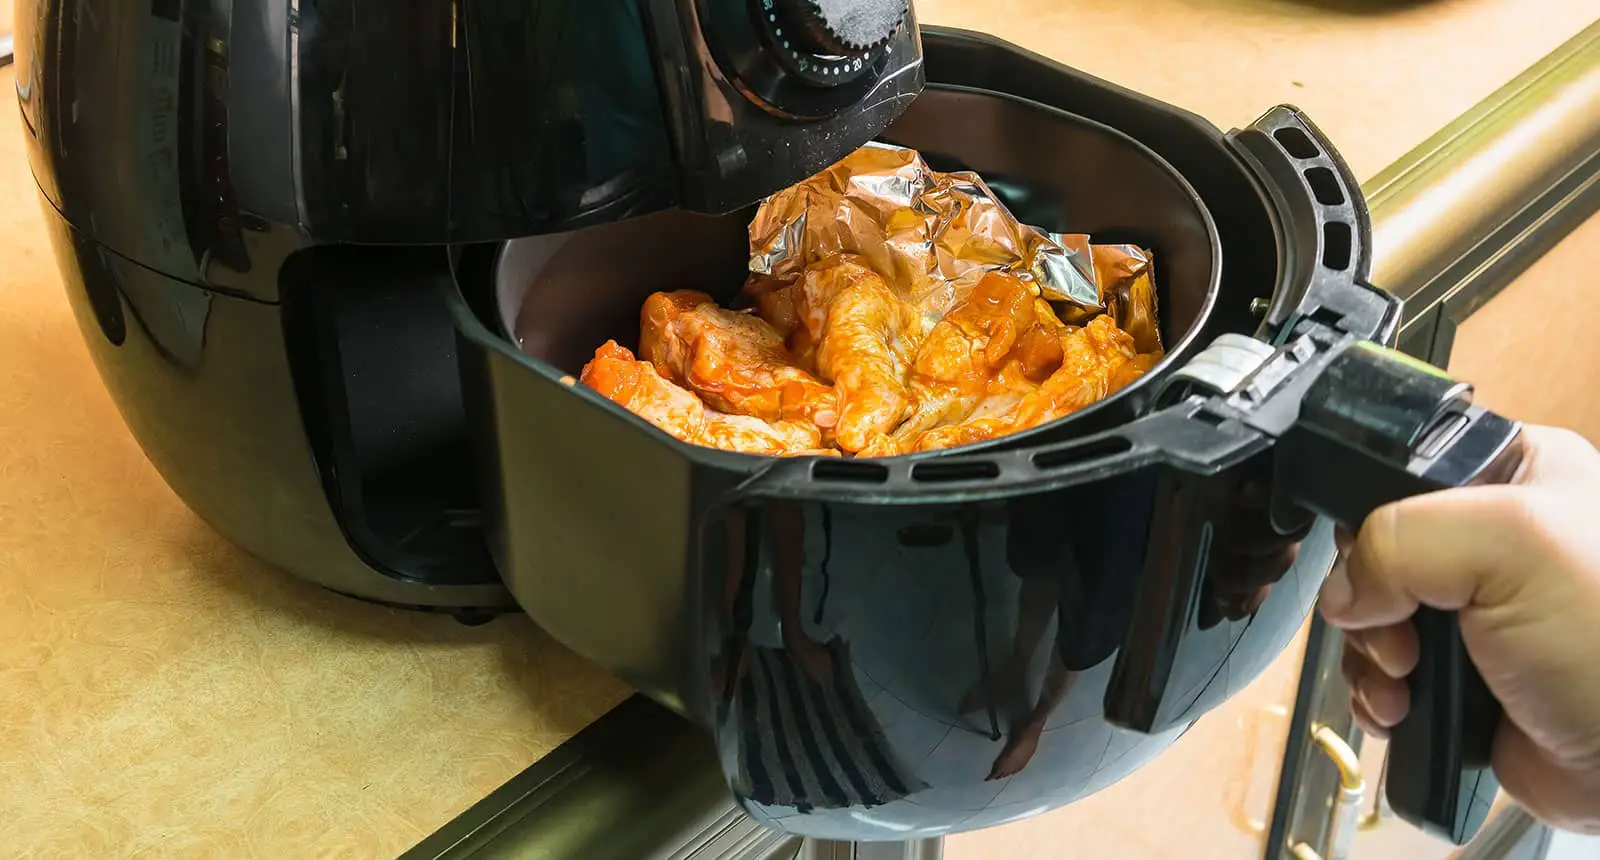 Top 5 Best Air Fryer With Stainless Steel Basket Reviews 2021